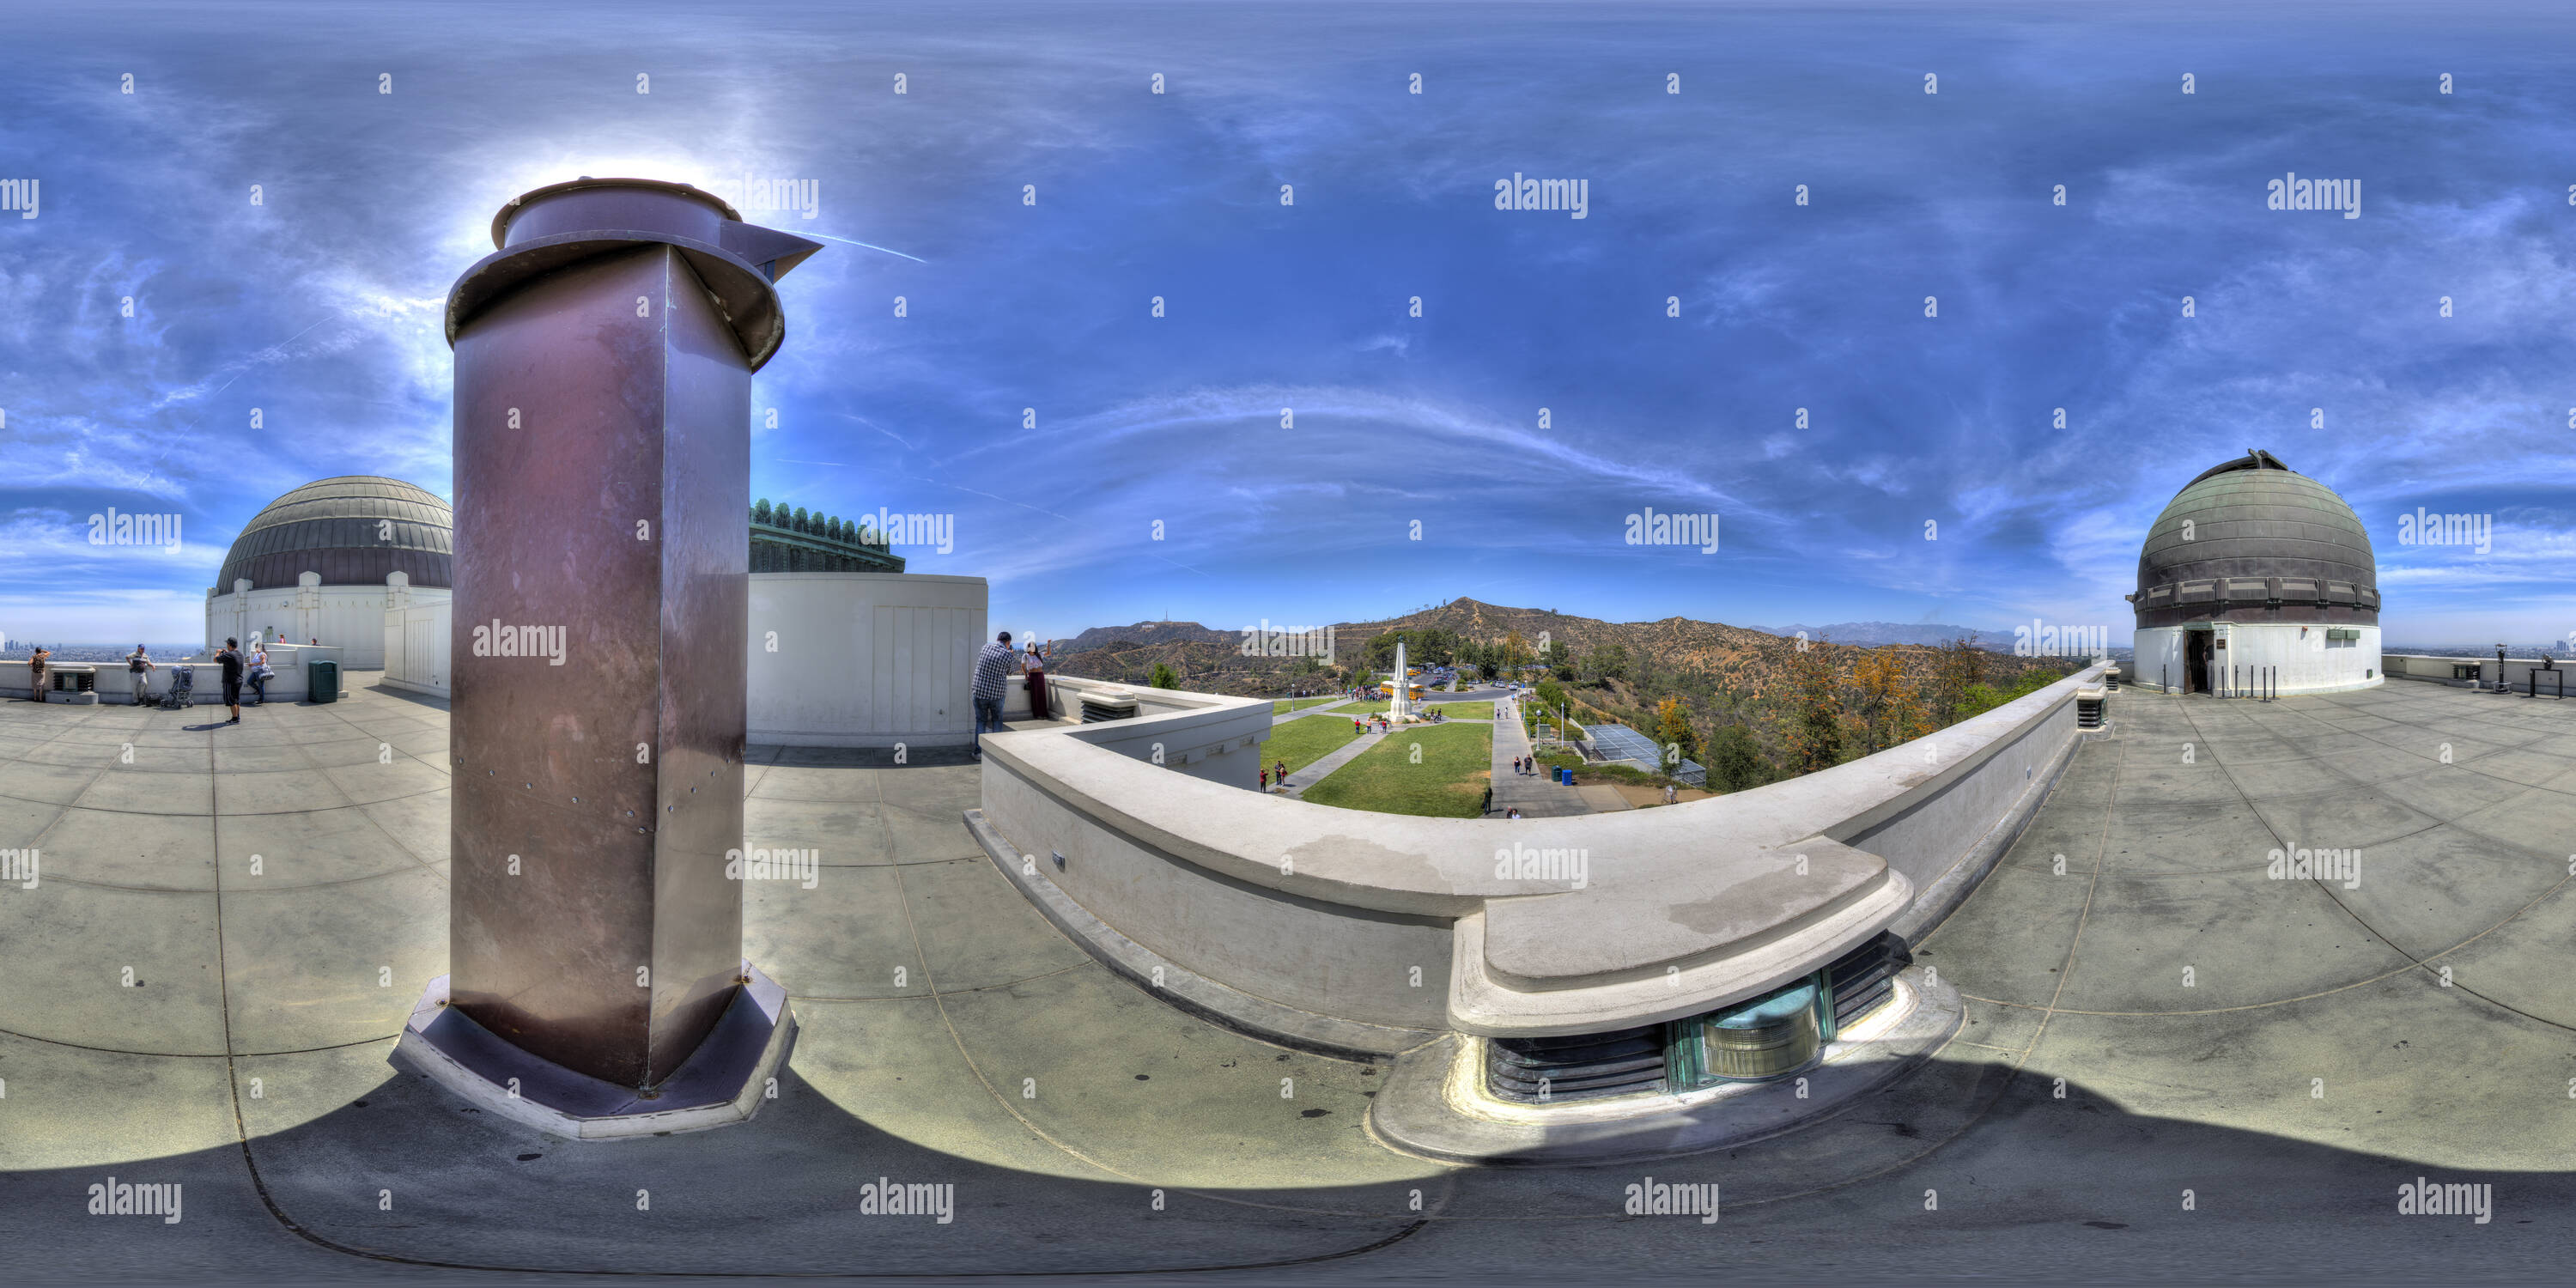 360 degree panoramic view of Camera Obscura, Griffith Observatory, Los Angeles, CA